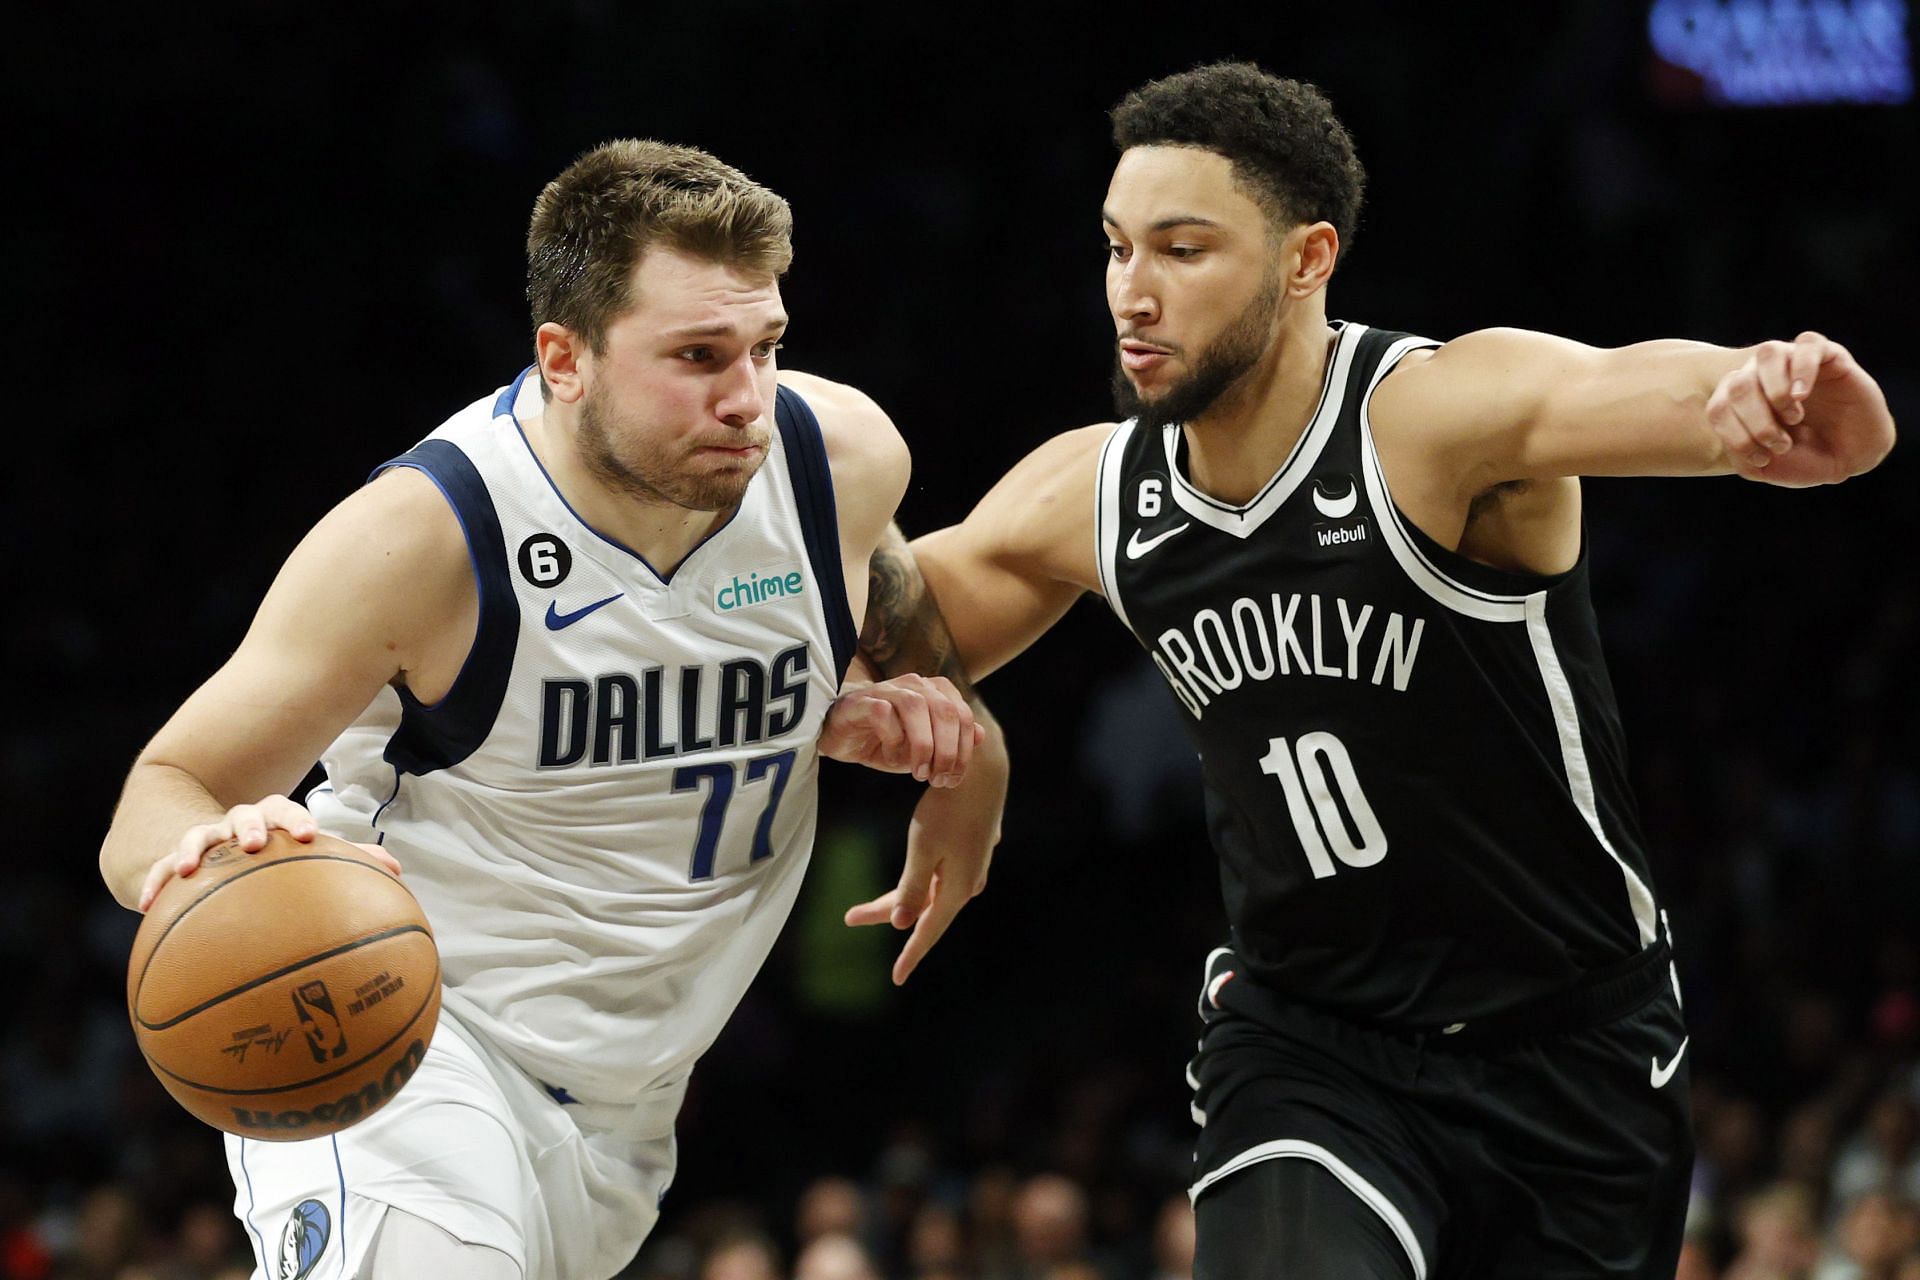 Dallas Mavericks superstar guard Luka Doncic (left) in action against the Brooklyn Nets